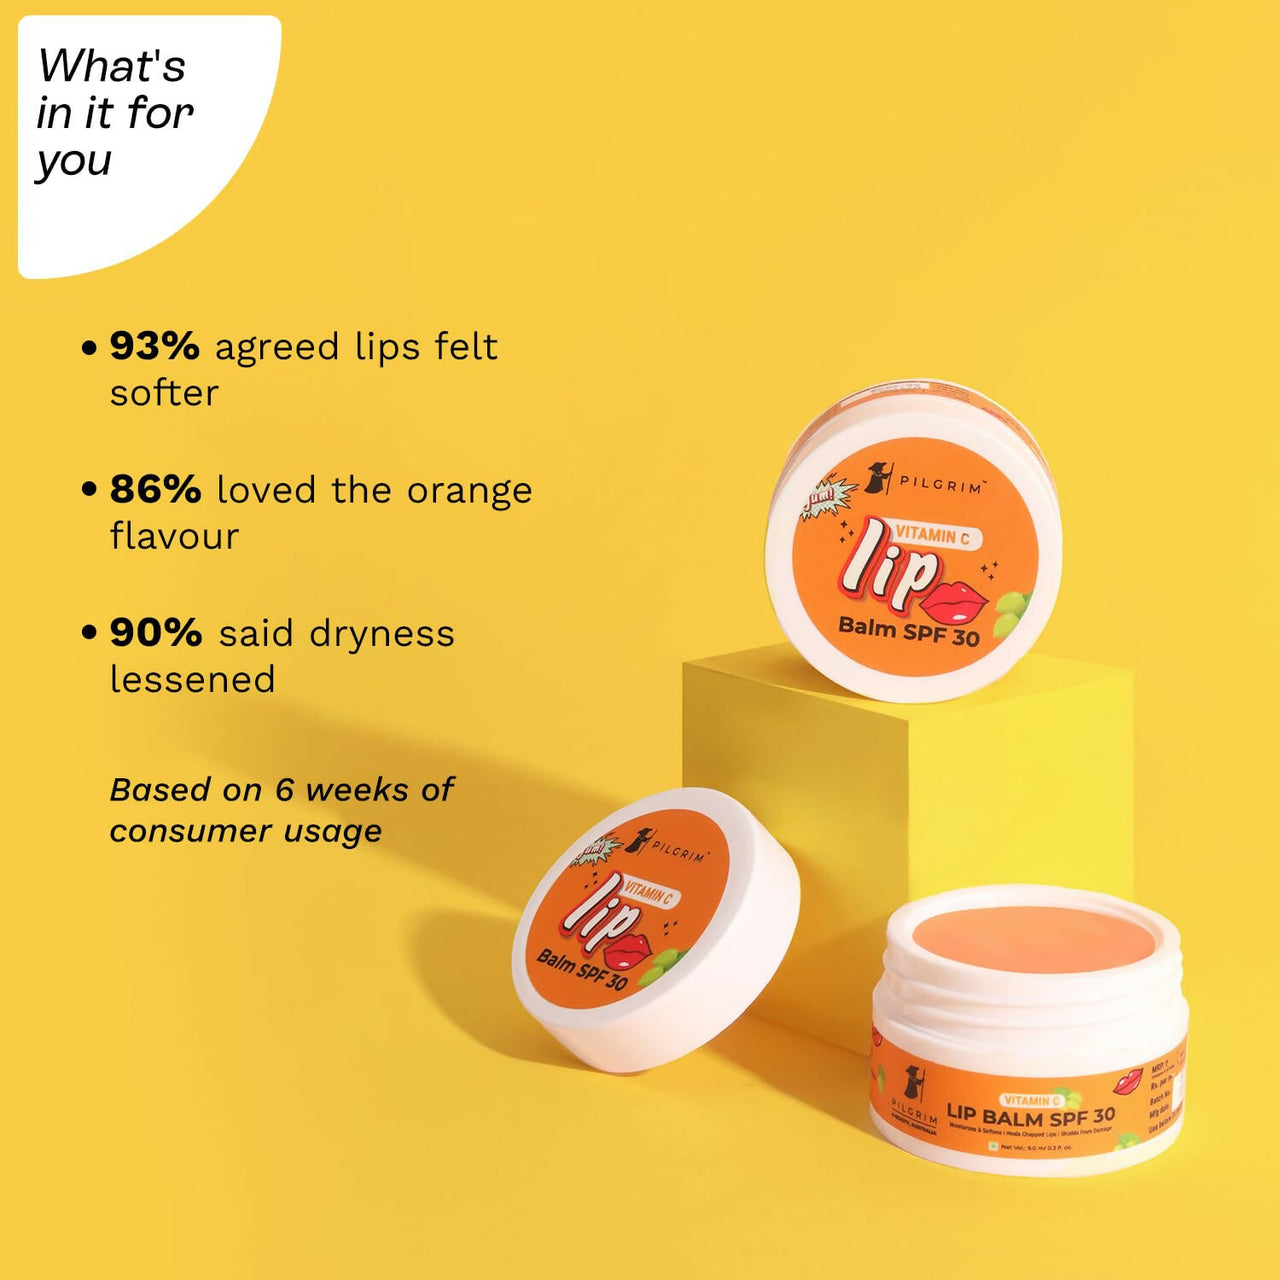 Pilgrim Vitamin C Lip Balm SPF 30 with Australian Kakadu Plum & Shea Butter For Smooth Soft Lips, Soothing & Hydrating Dry & Chapped Lips - Distacart